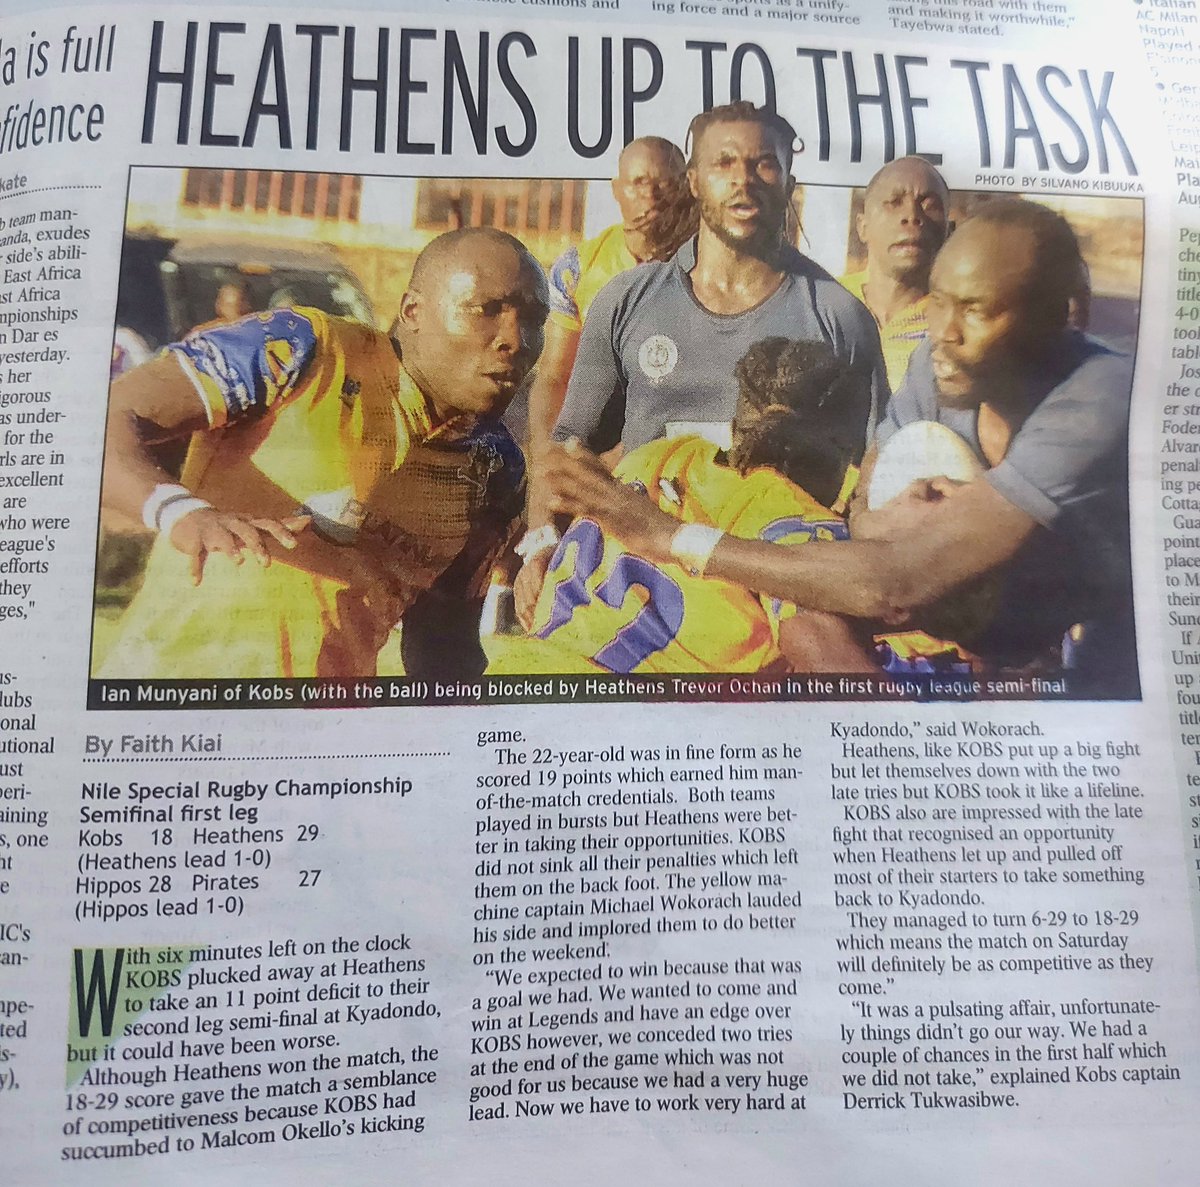 🗞️ MEDIA WATCH! Grab yourself today’s @newvisionwire and have a read through our last weekend encounter against KOBs. 🖊️ Faith Kai | @newvisionsport #HeathensTuko || #MunguNiWetu || #PlatinumCreditHeathens